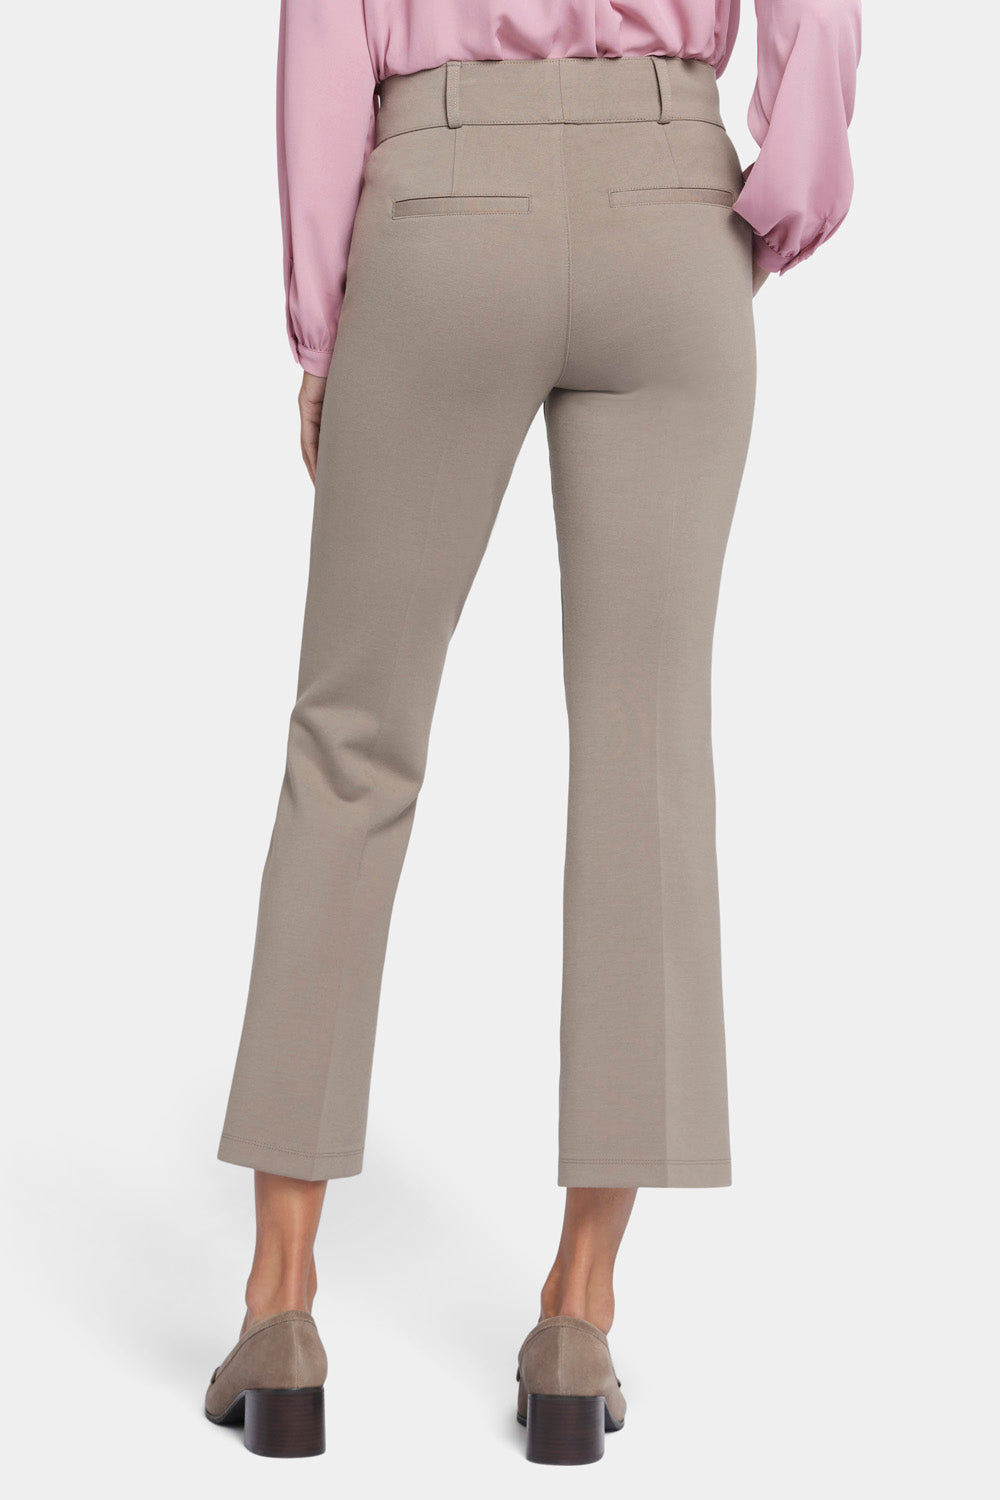 Pull-On Flared Ankle Trouser Pants - Saddlewood